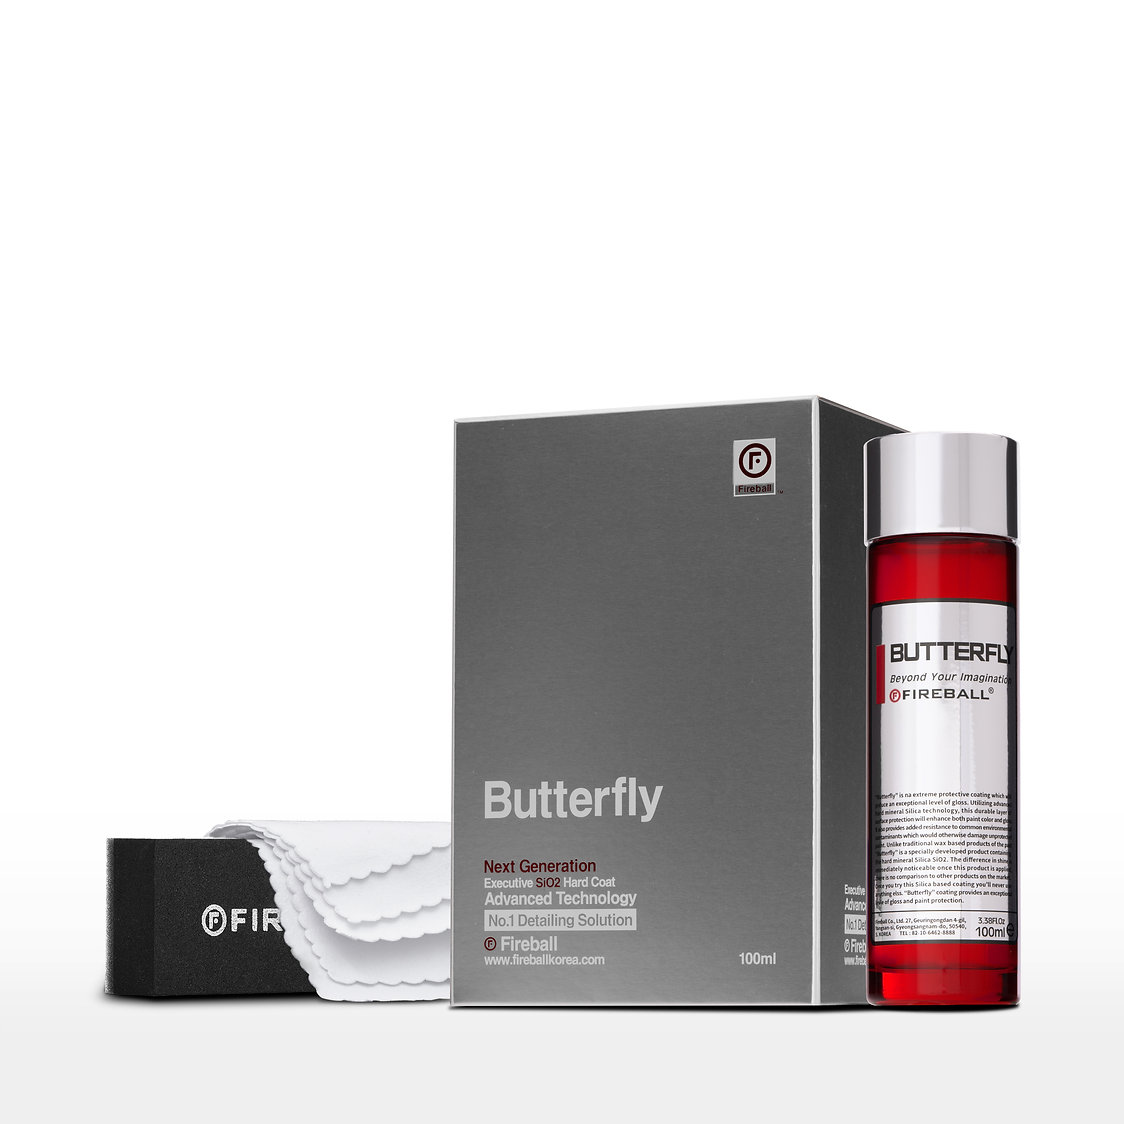 Fireball Butterfly 50mL (Professional Authorized Only, contact us for access)